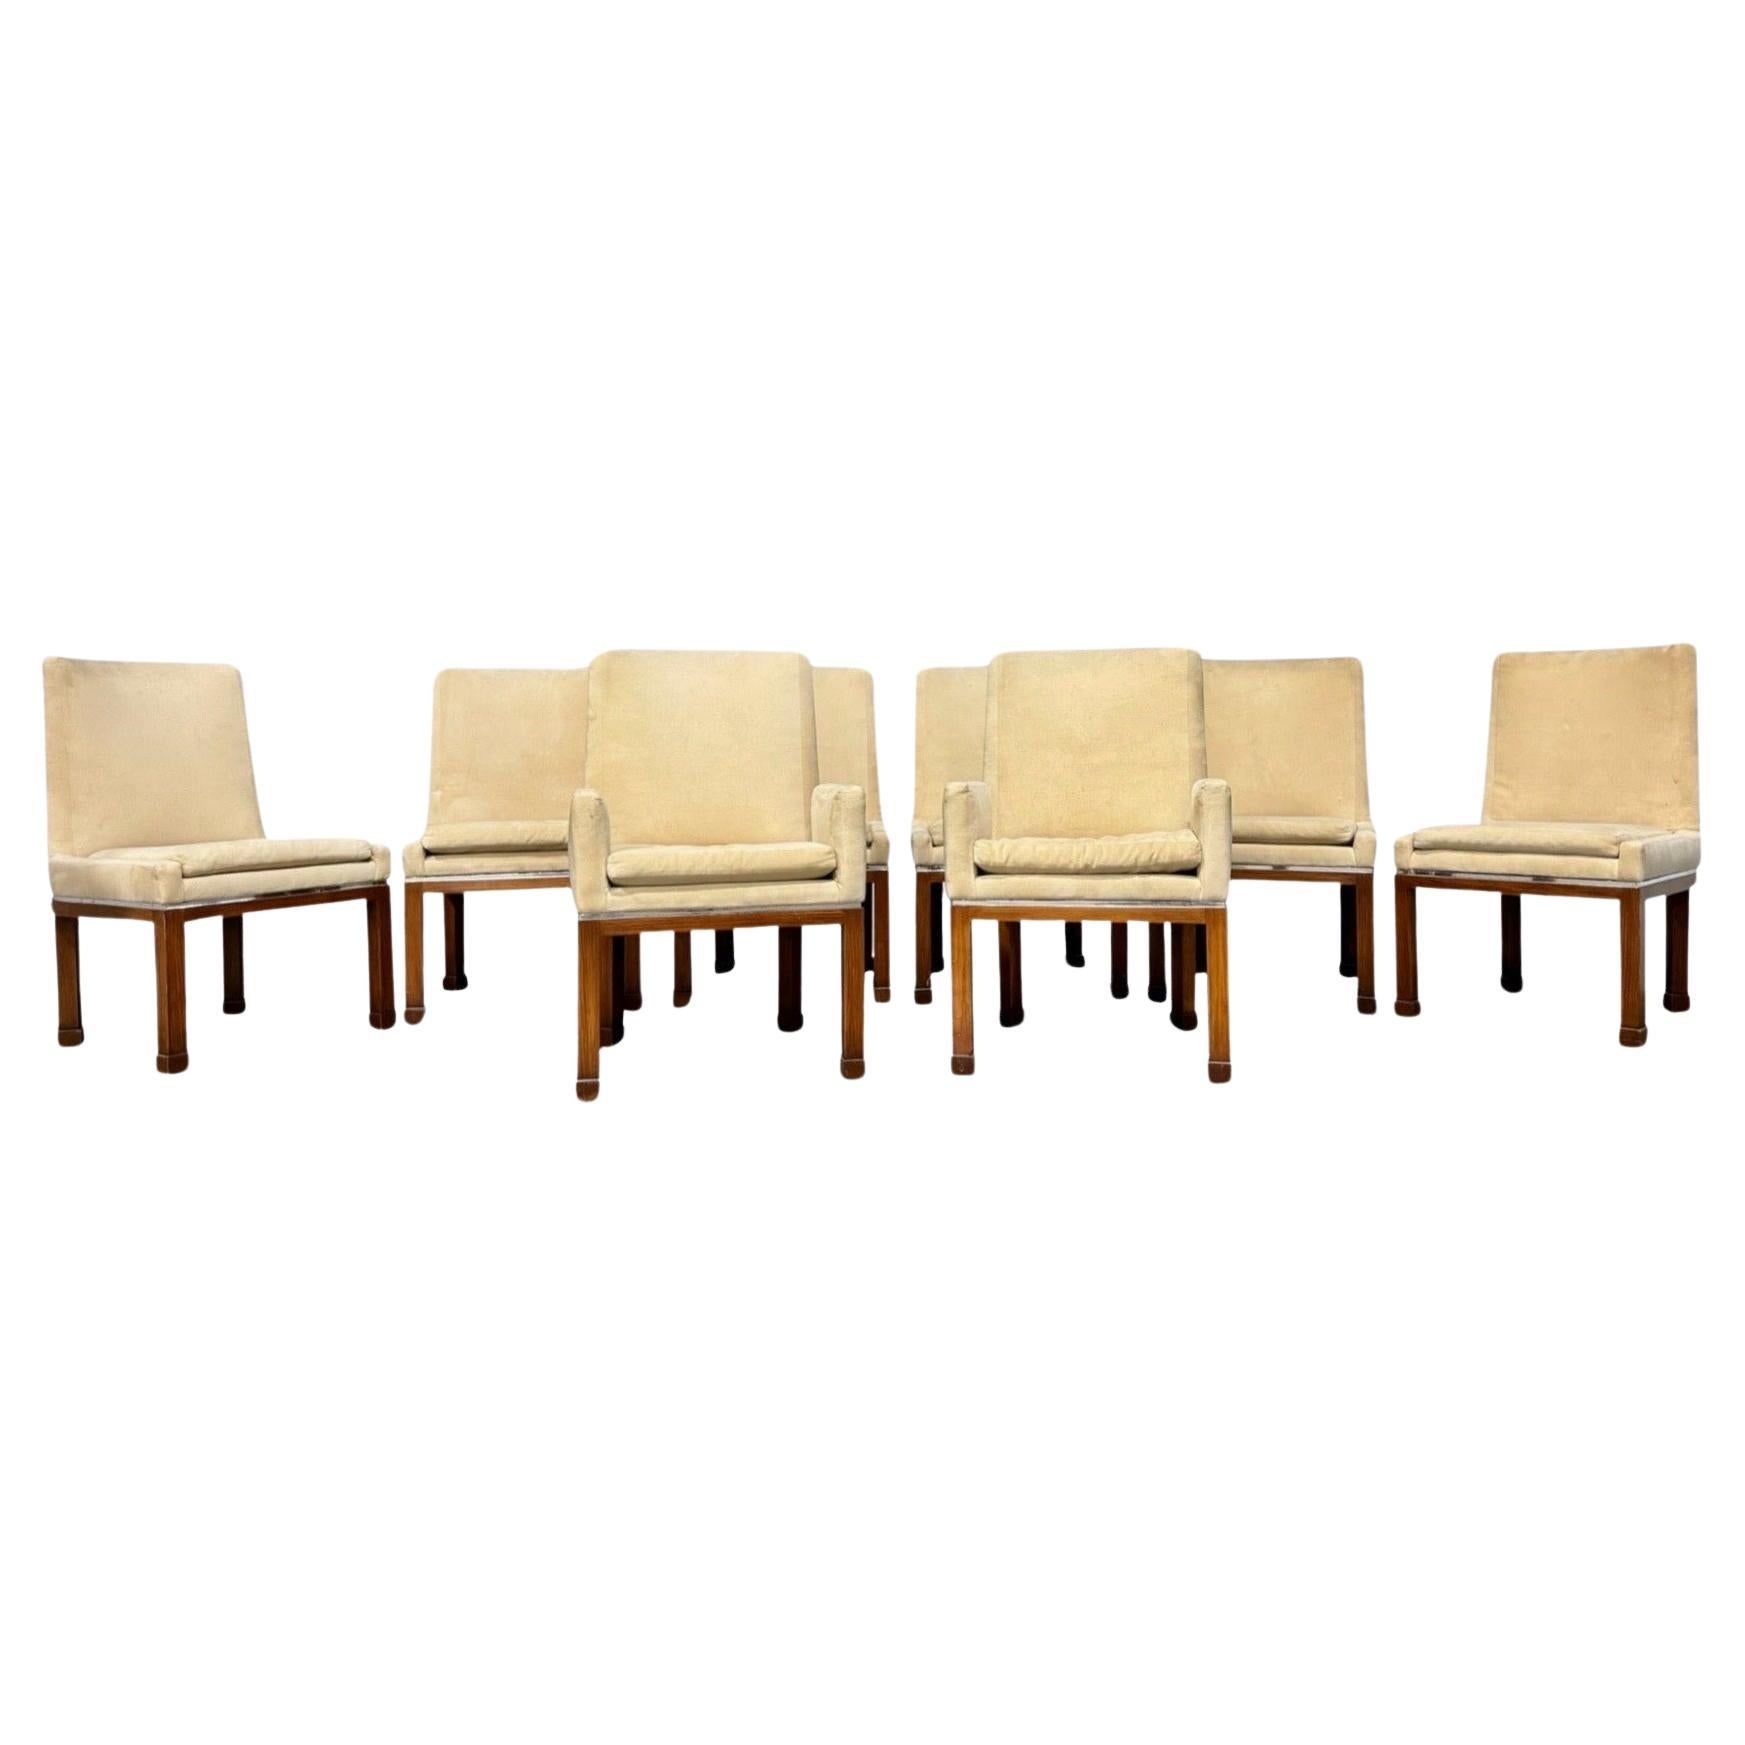 Vladimir Kagan Vintage Signed Dining Chairs, Set Of Eight c. 1970s For Sale